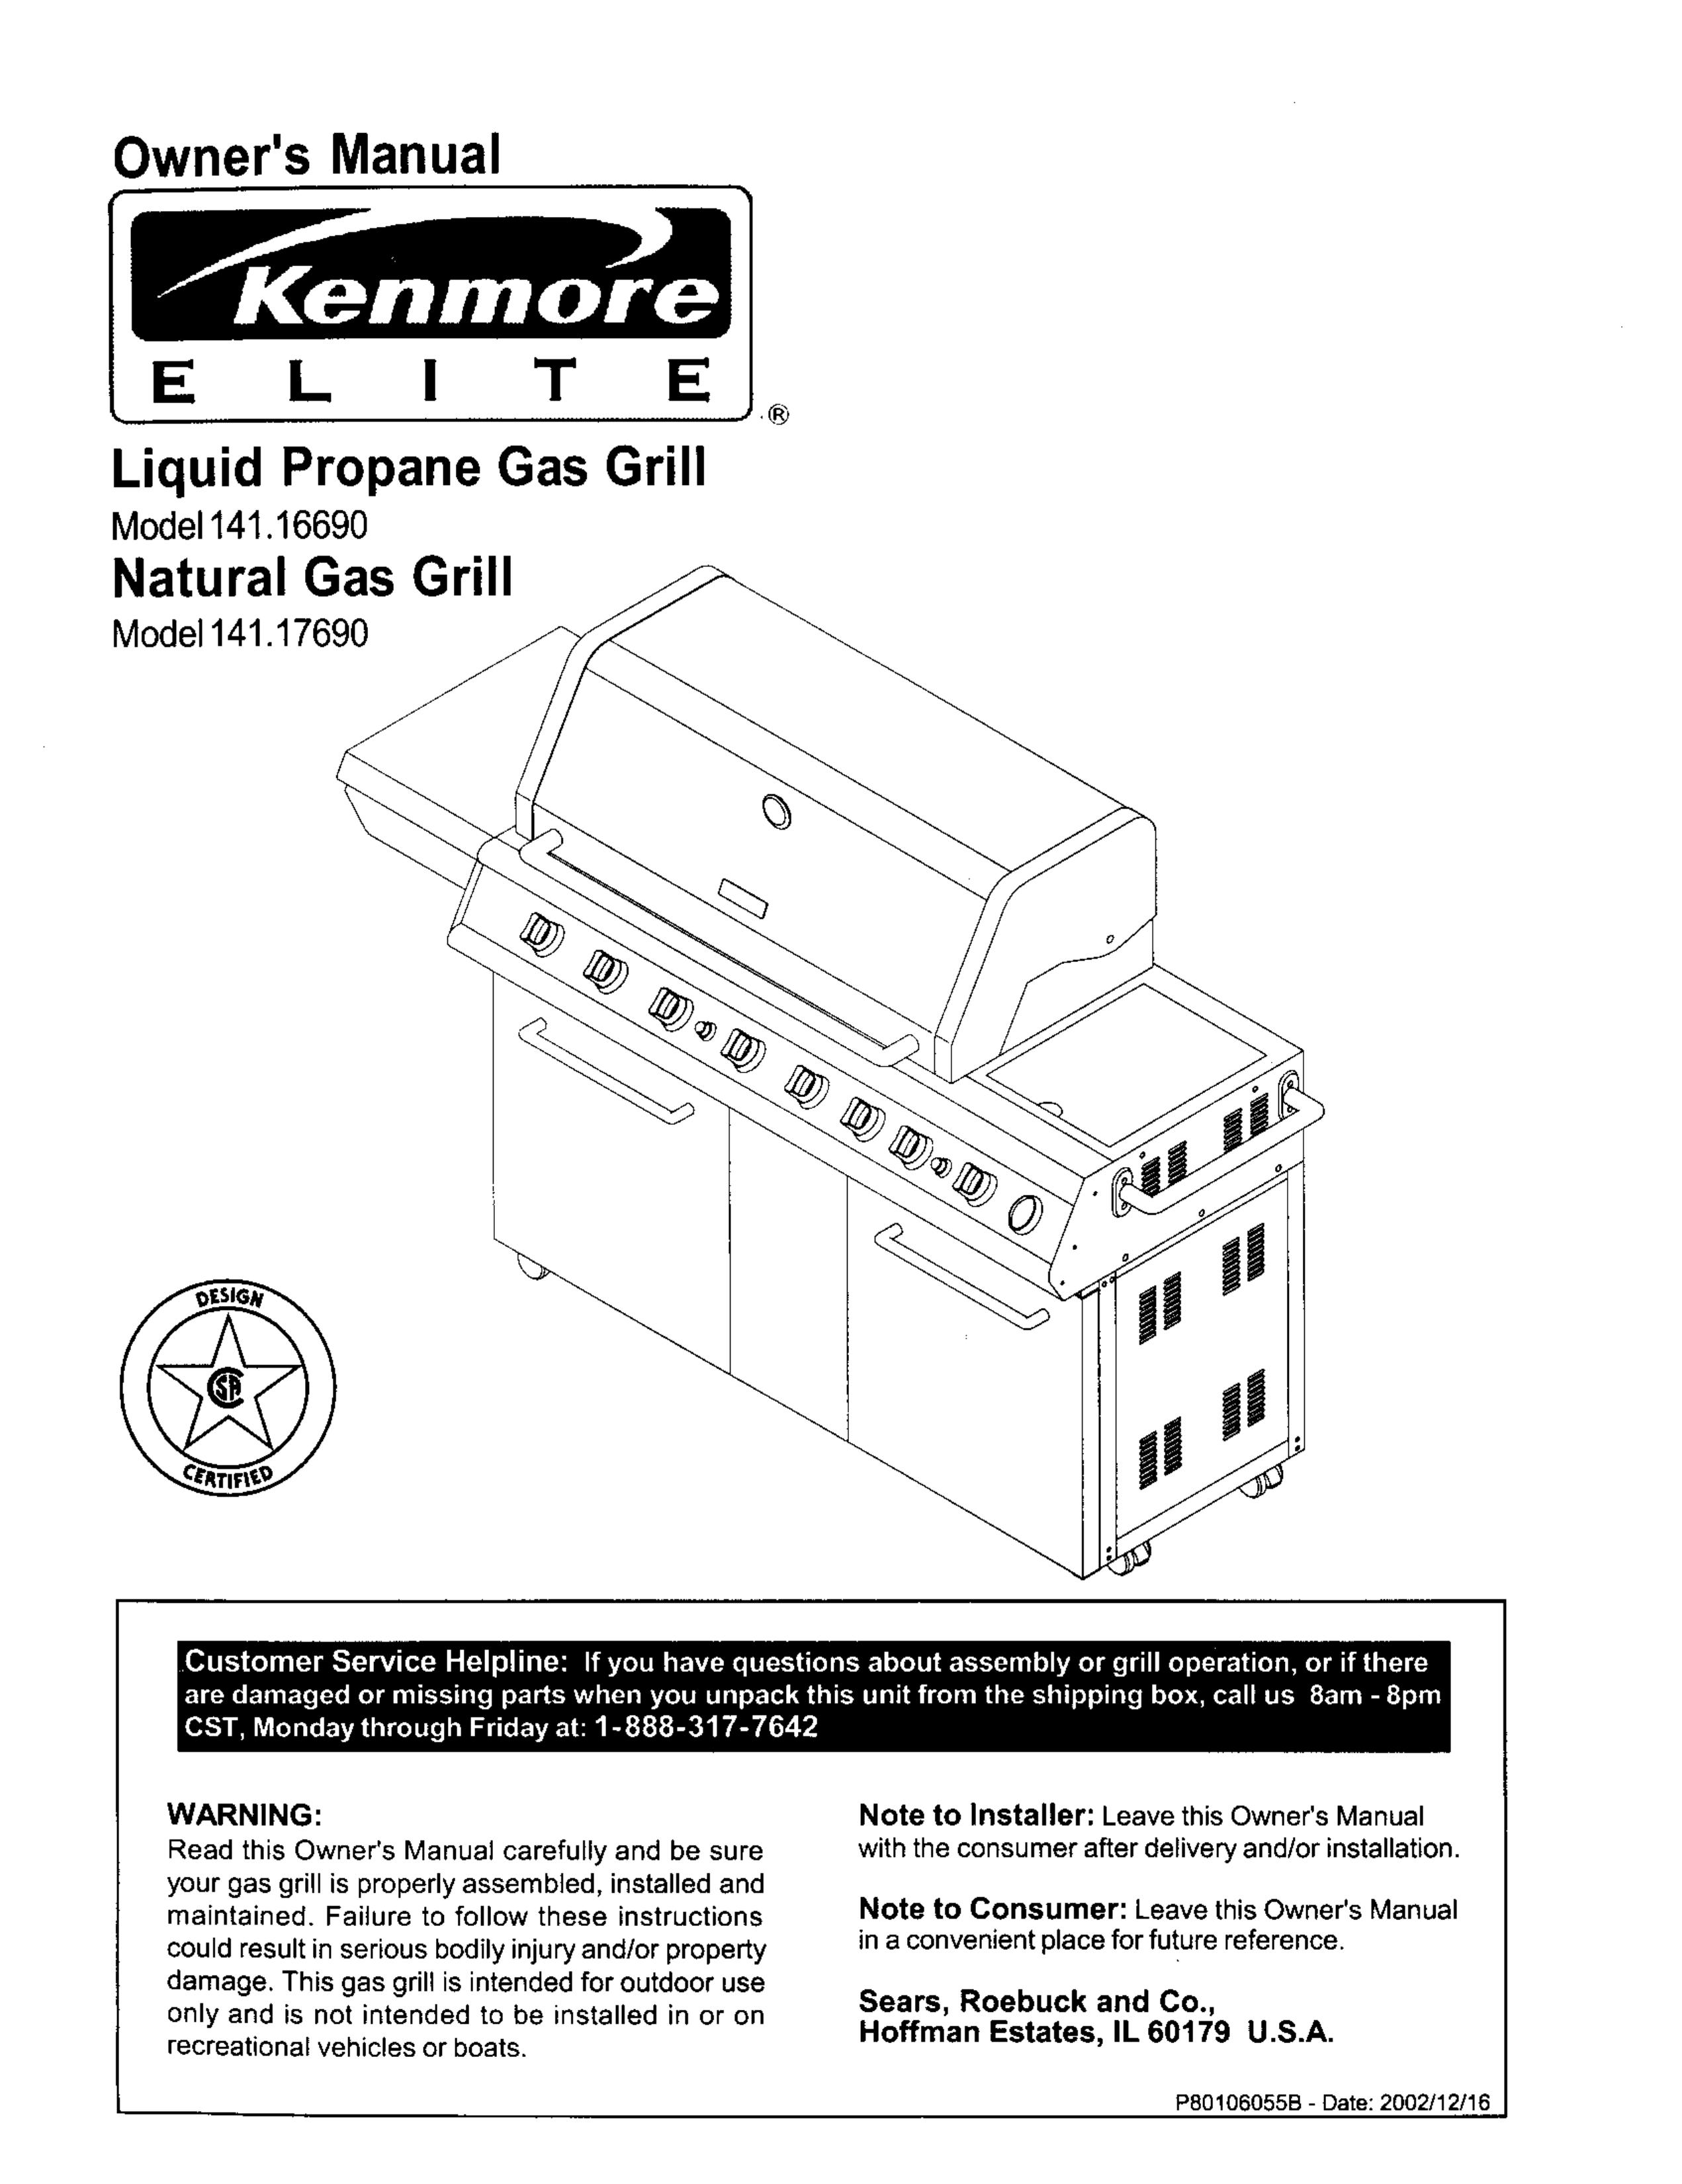 Kenmore 141 17690 Gas Grill User Manual